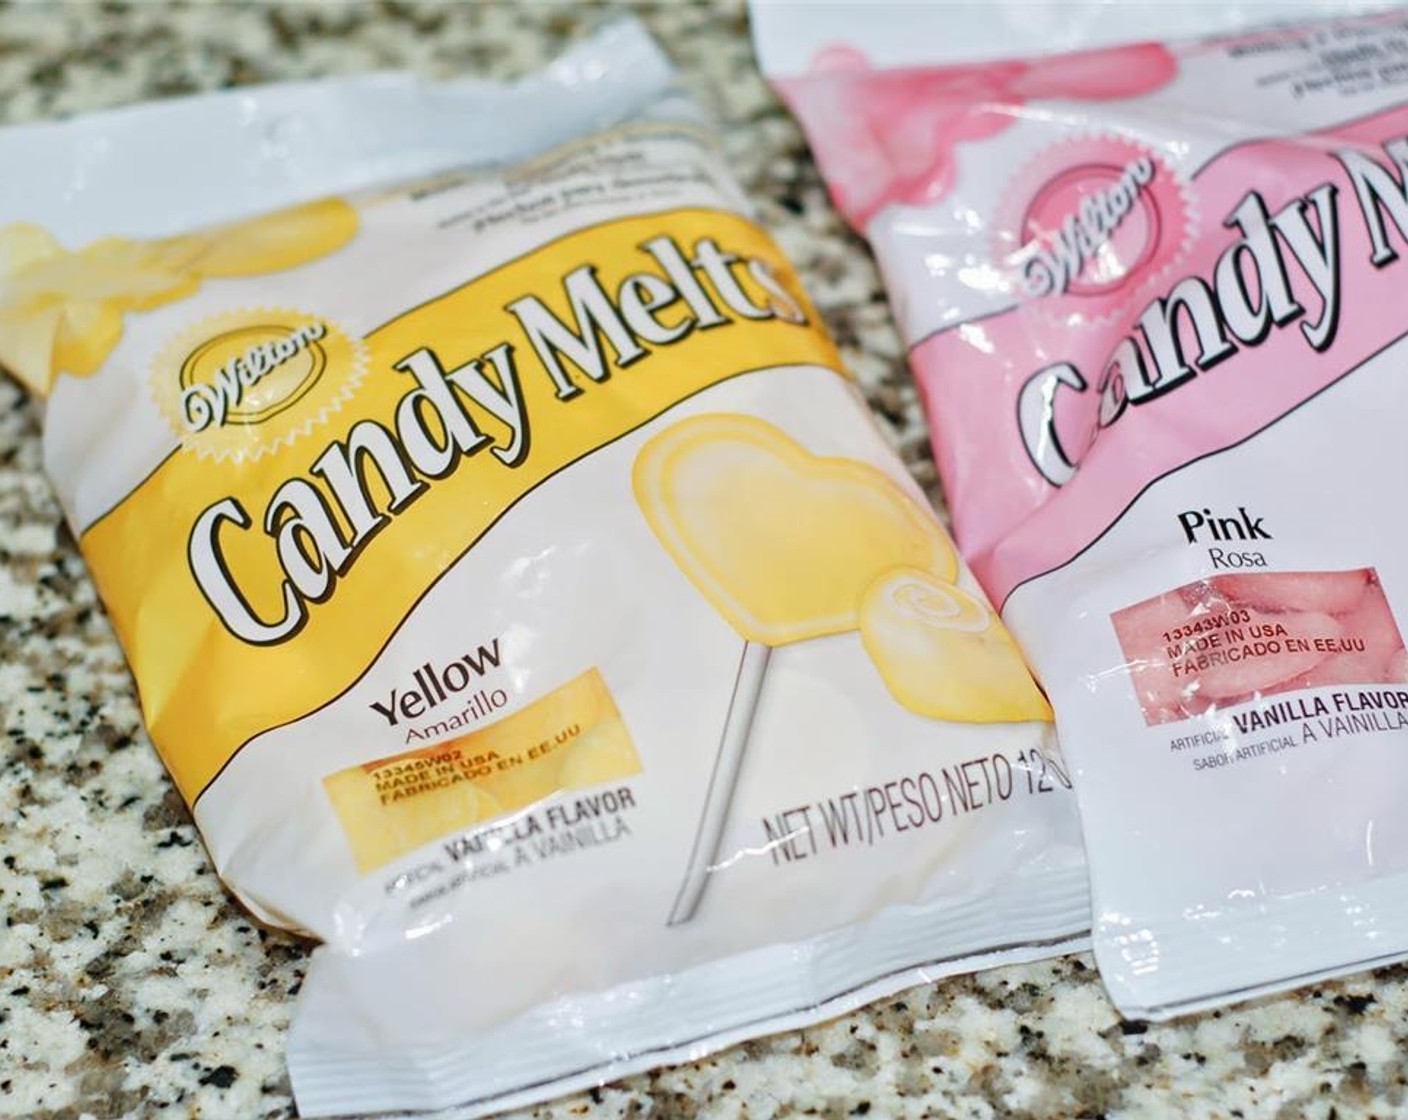 step 7 Using one color at a time, melt your Yellow Candy Melts (1 pckg) and Pink Candy Melts (1 pckg) in the microwave according to package instructions. Make sure coating is just warm, not hot.